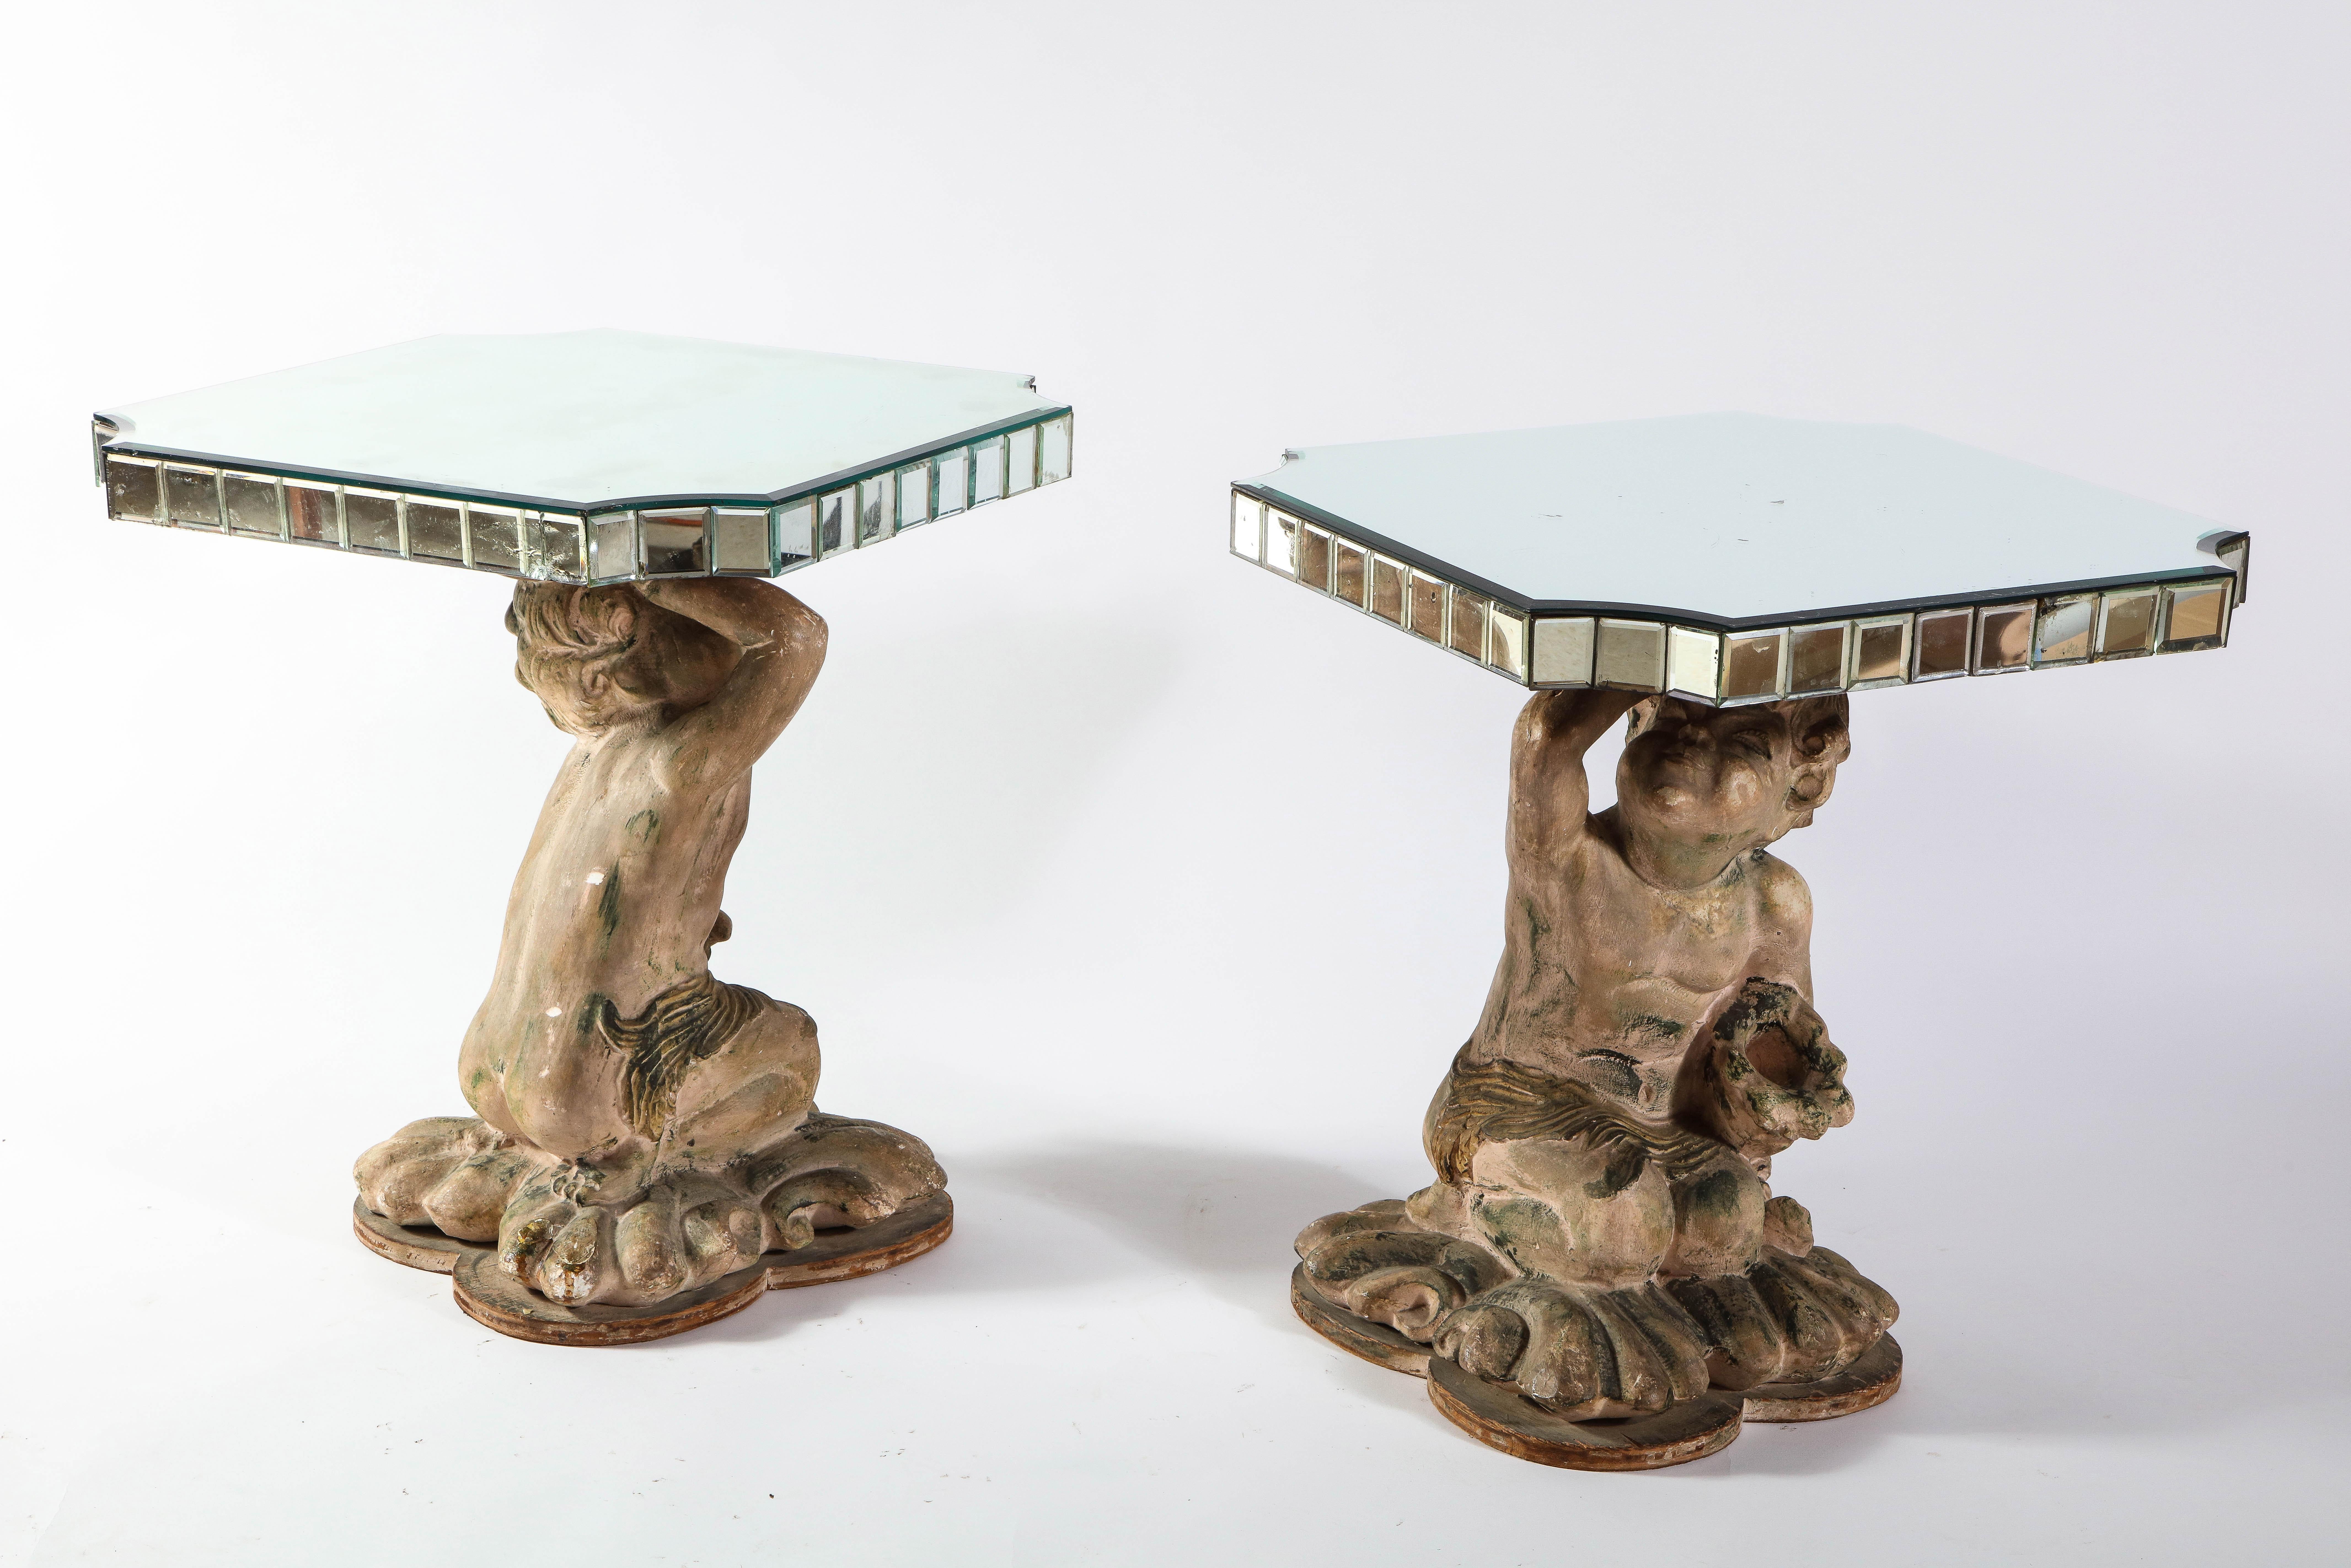 An unusual and quite decorative pair of midcentury French terracotta mirrored and figural side tables. Each cupid-like figure is made of hand carved terracotta, which is finely hand-finished with a chisel. Each cupid figure is naturalistic in